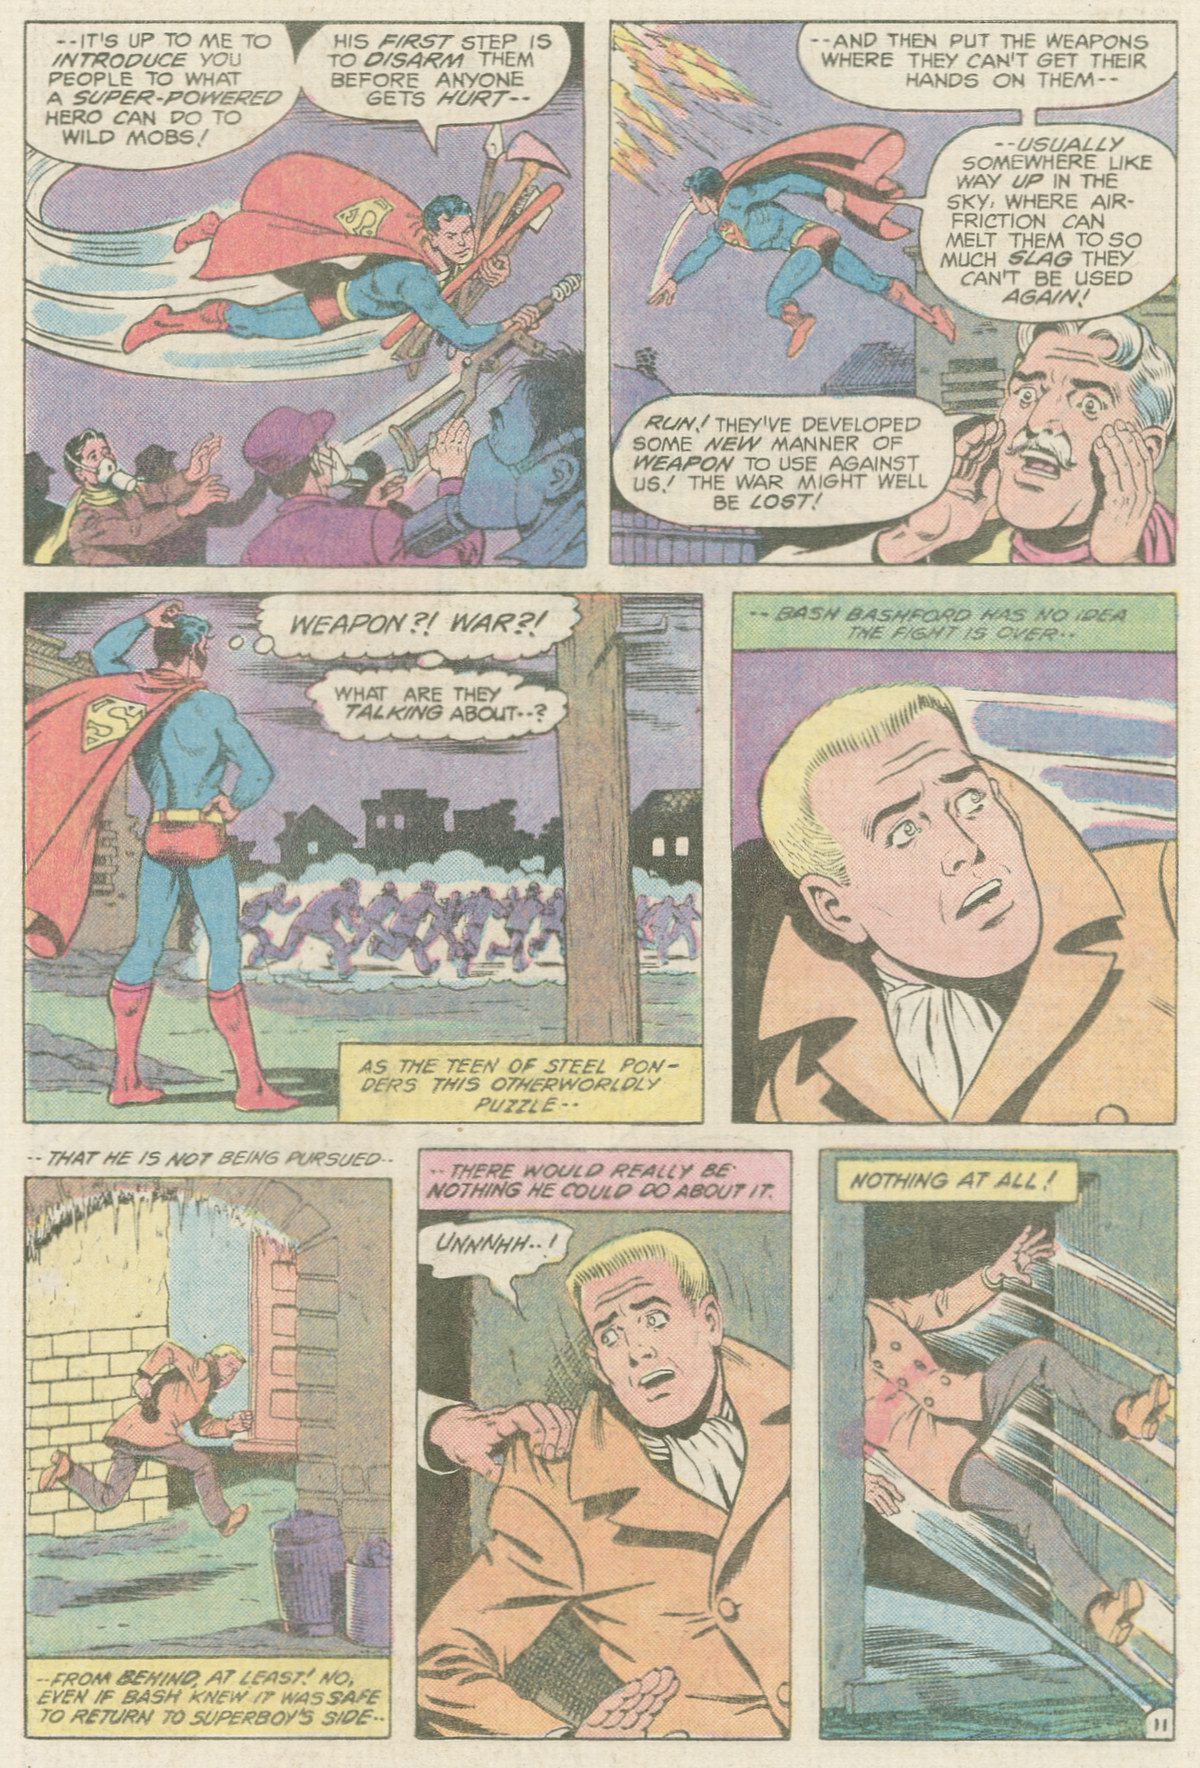 The New Adventures of Superboy 39 Page 11